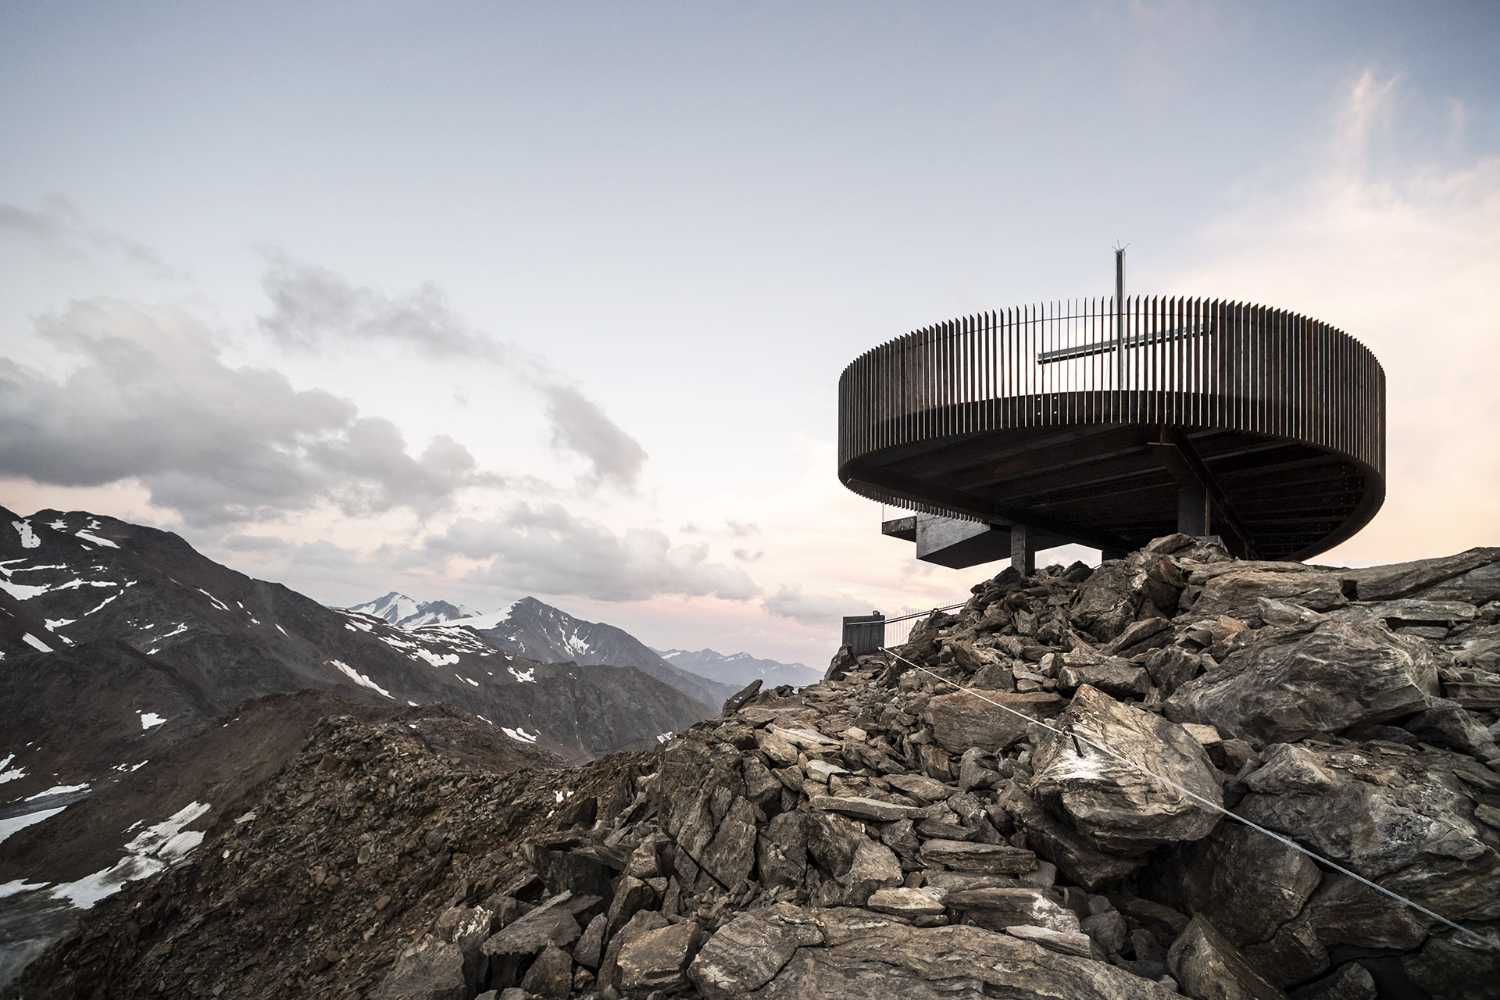 Corten steel and glass viewing platform. Breathtaking views of the mountain to breathe freedom